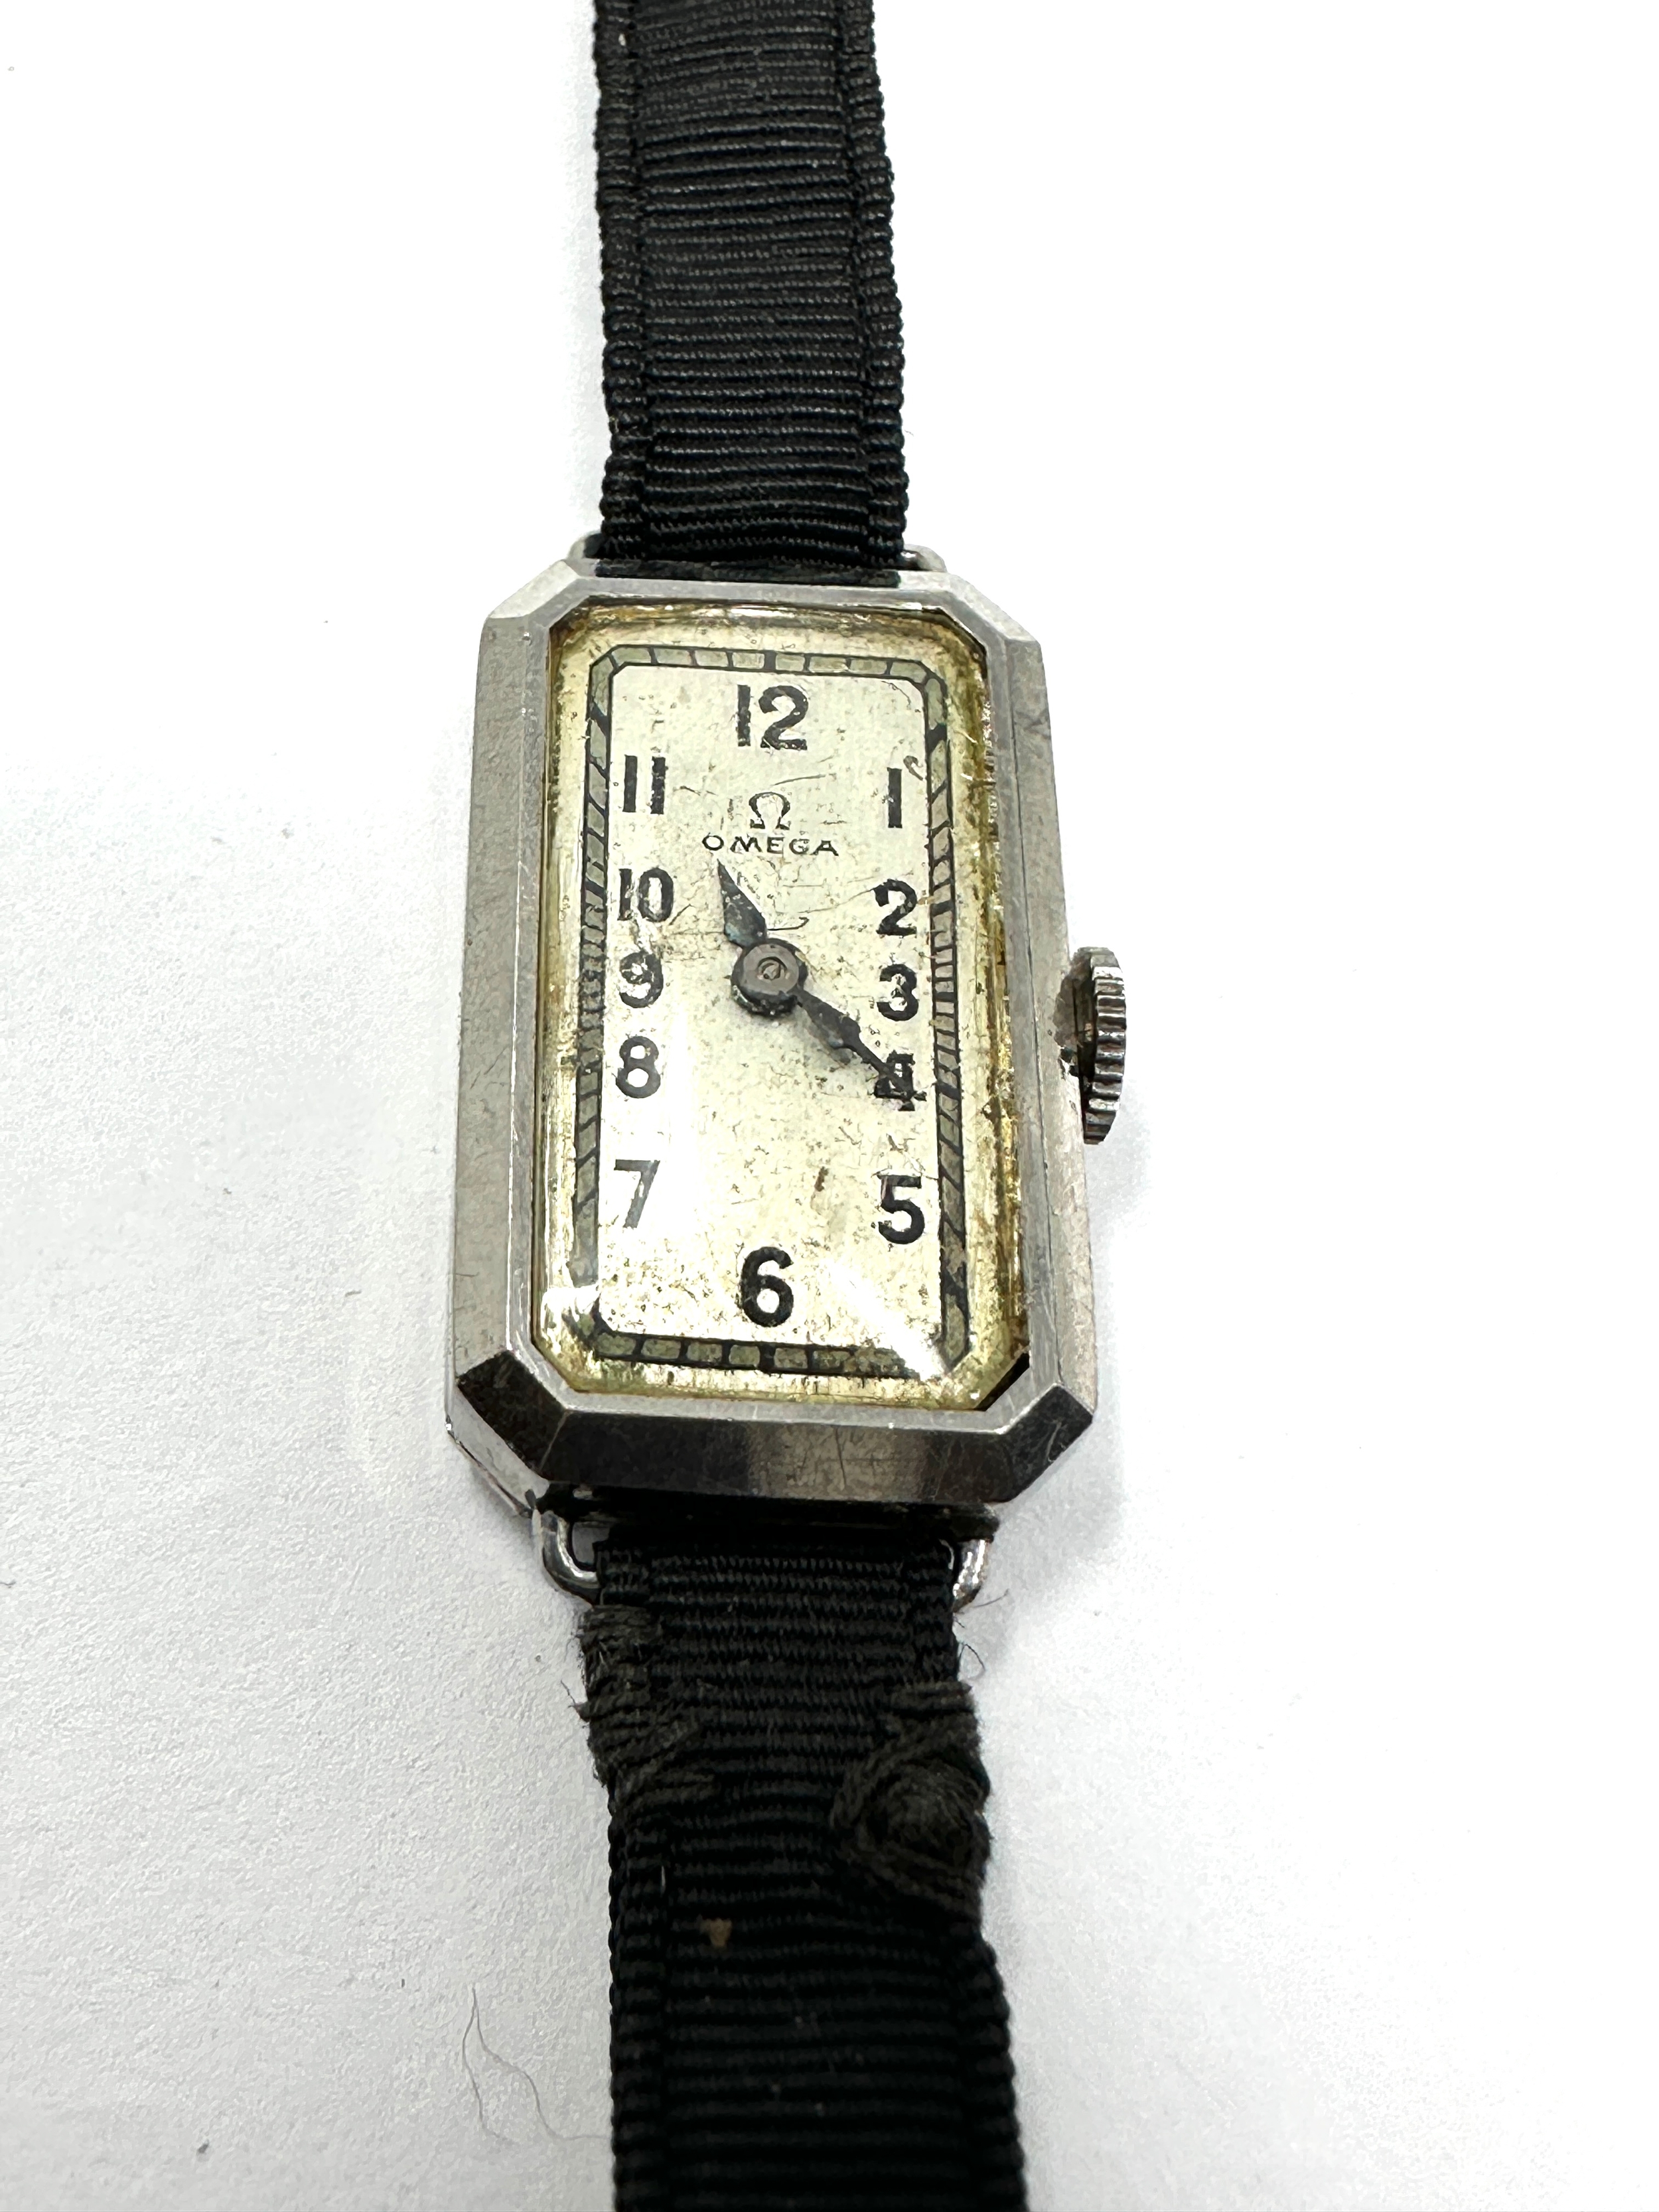 Vintage ladies omega cocktail wristwatch the watch is ticking